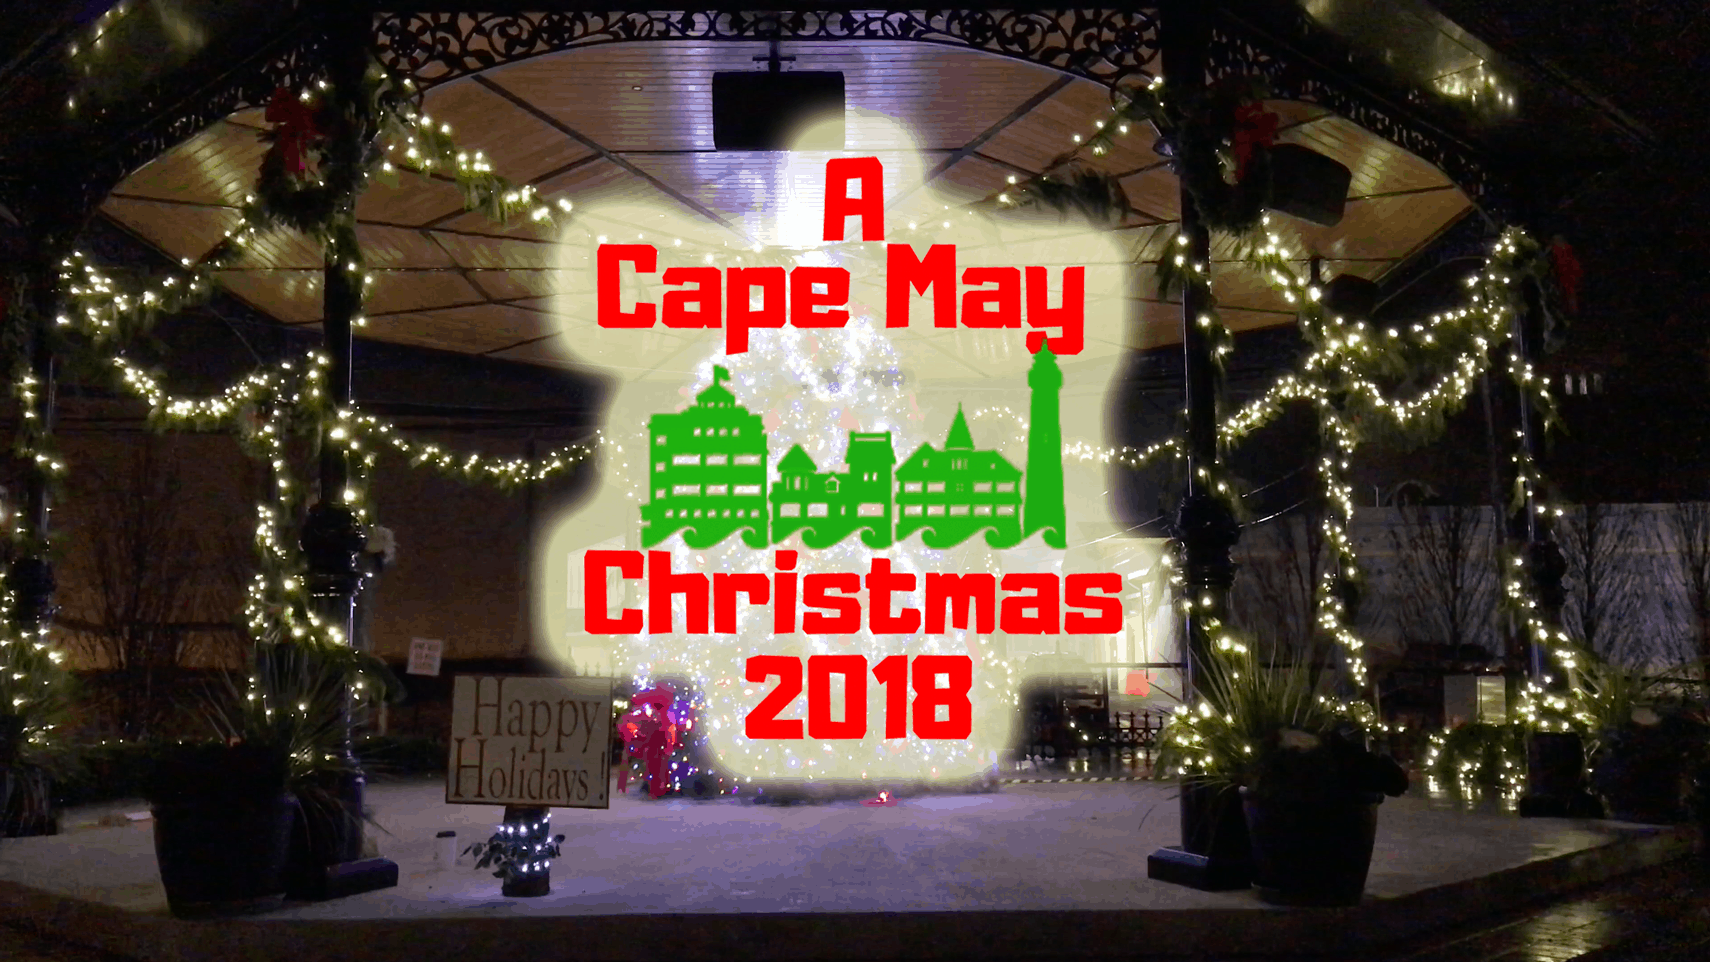 A Cape May Christmas 2018